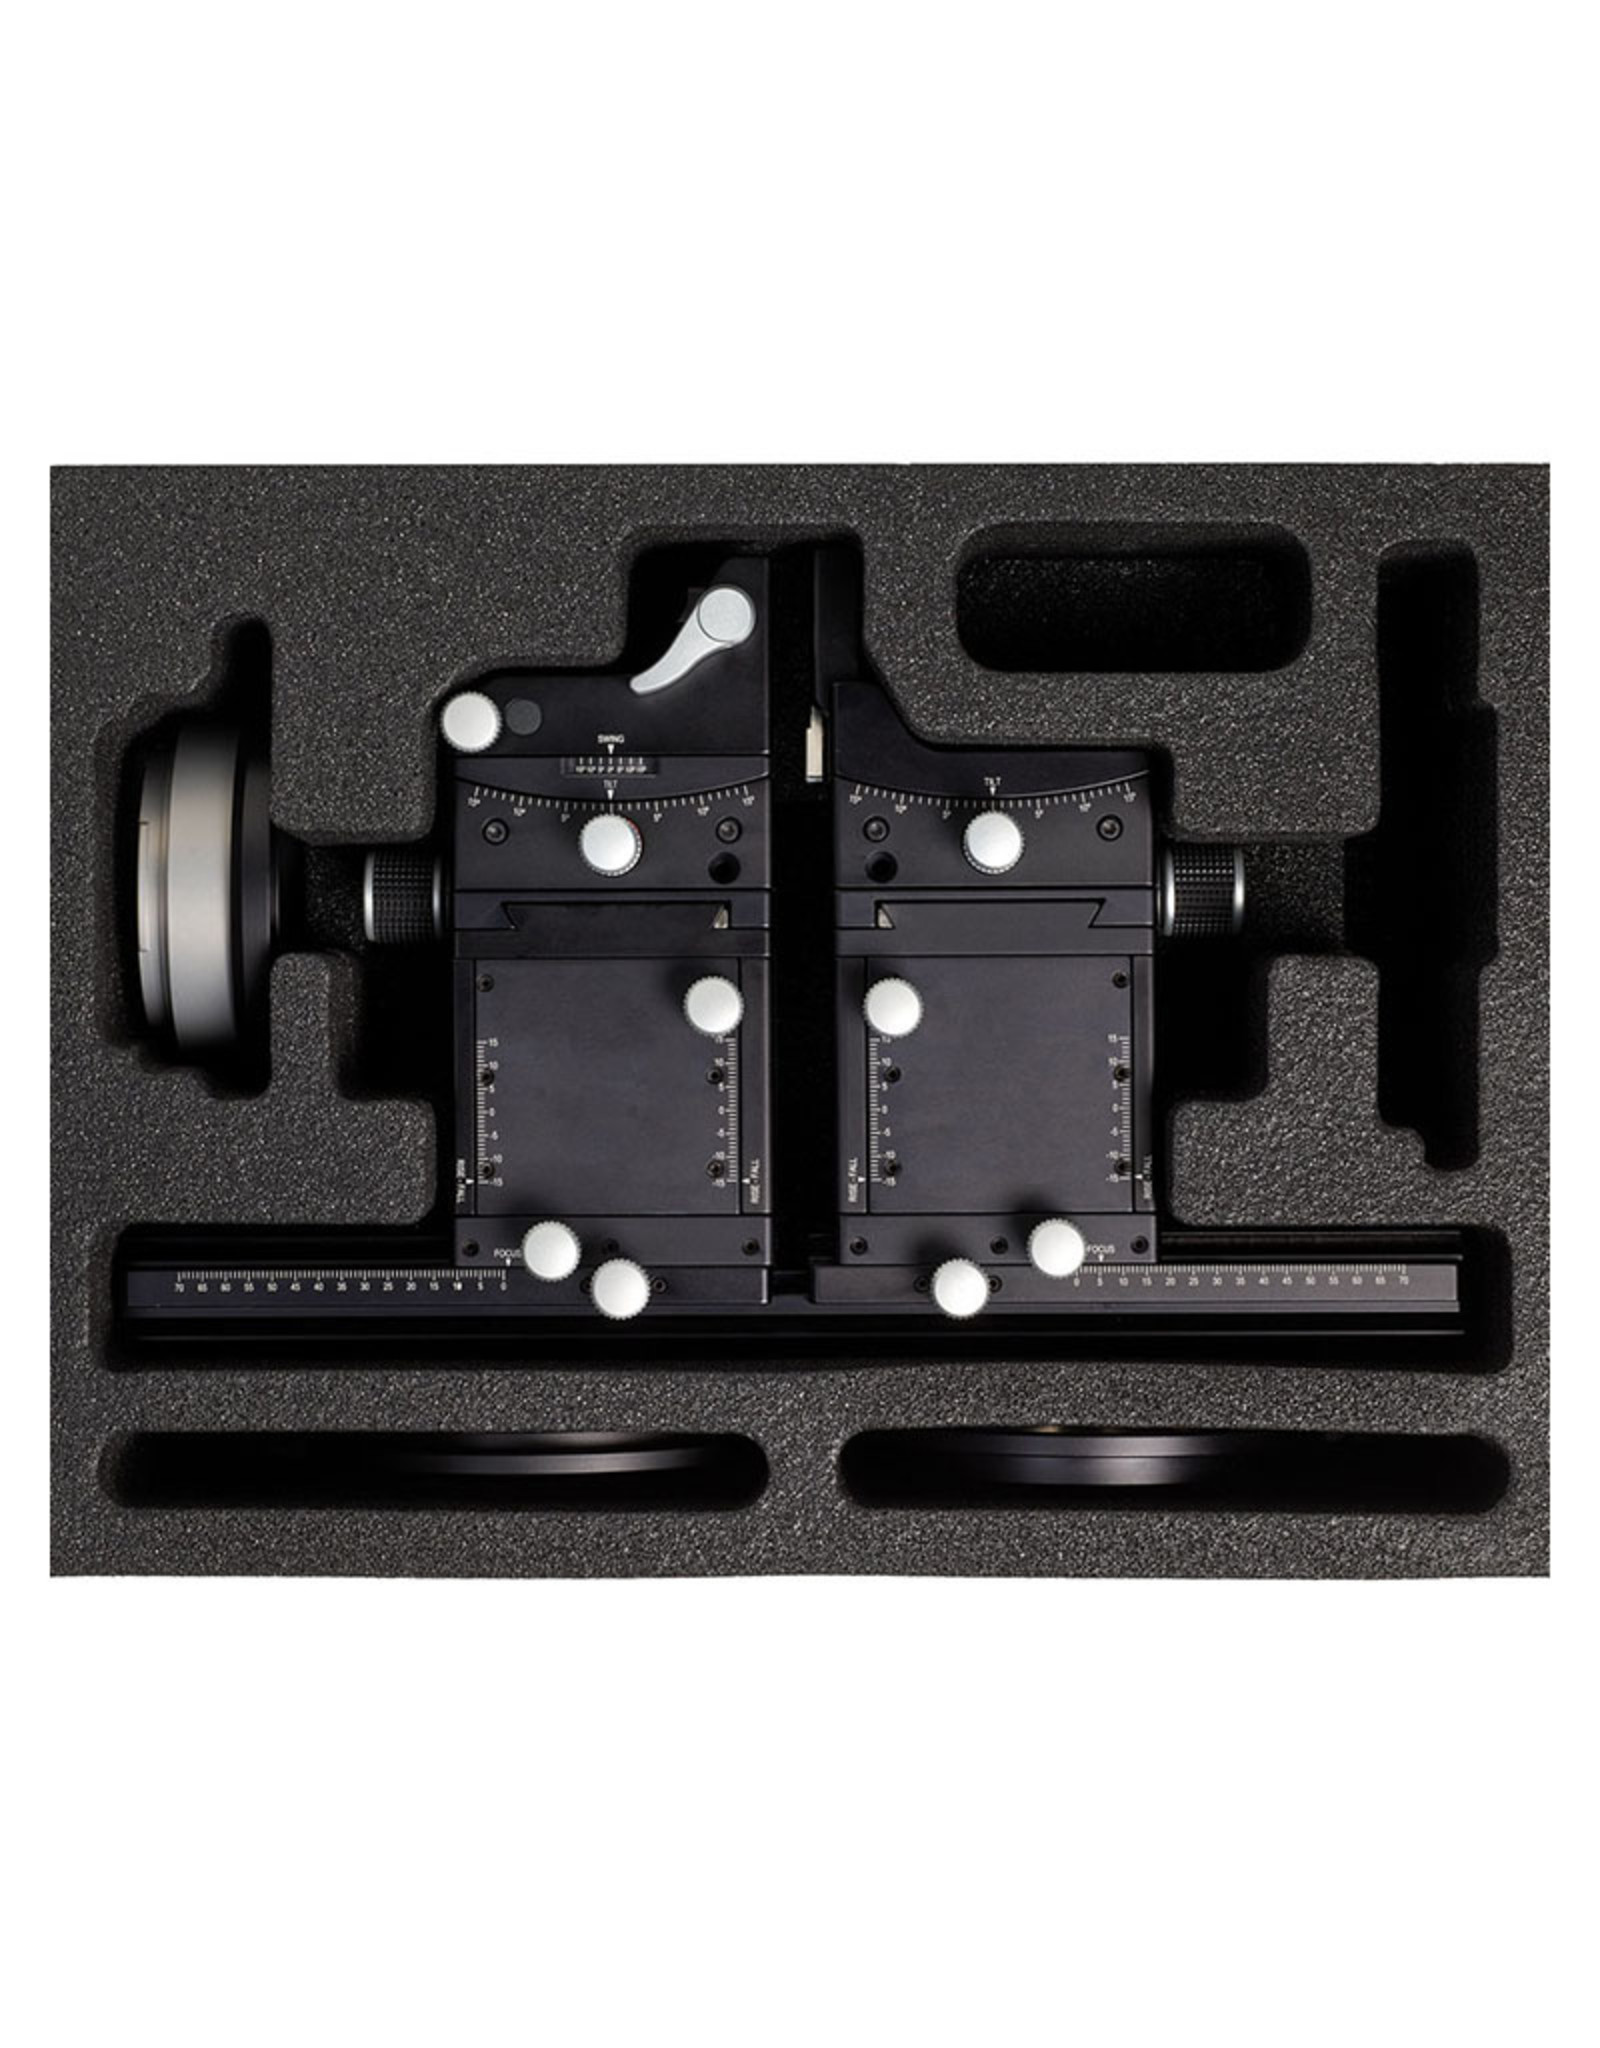 Cambo Cambo ACMV-IQ Kit Actus MV camera body with IQ back mount, and long bellows